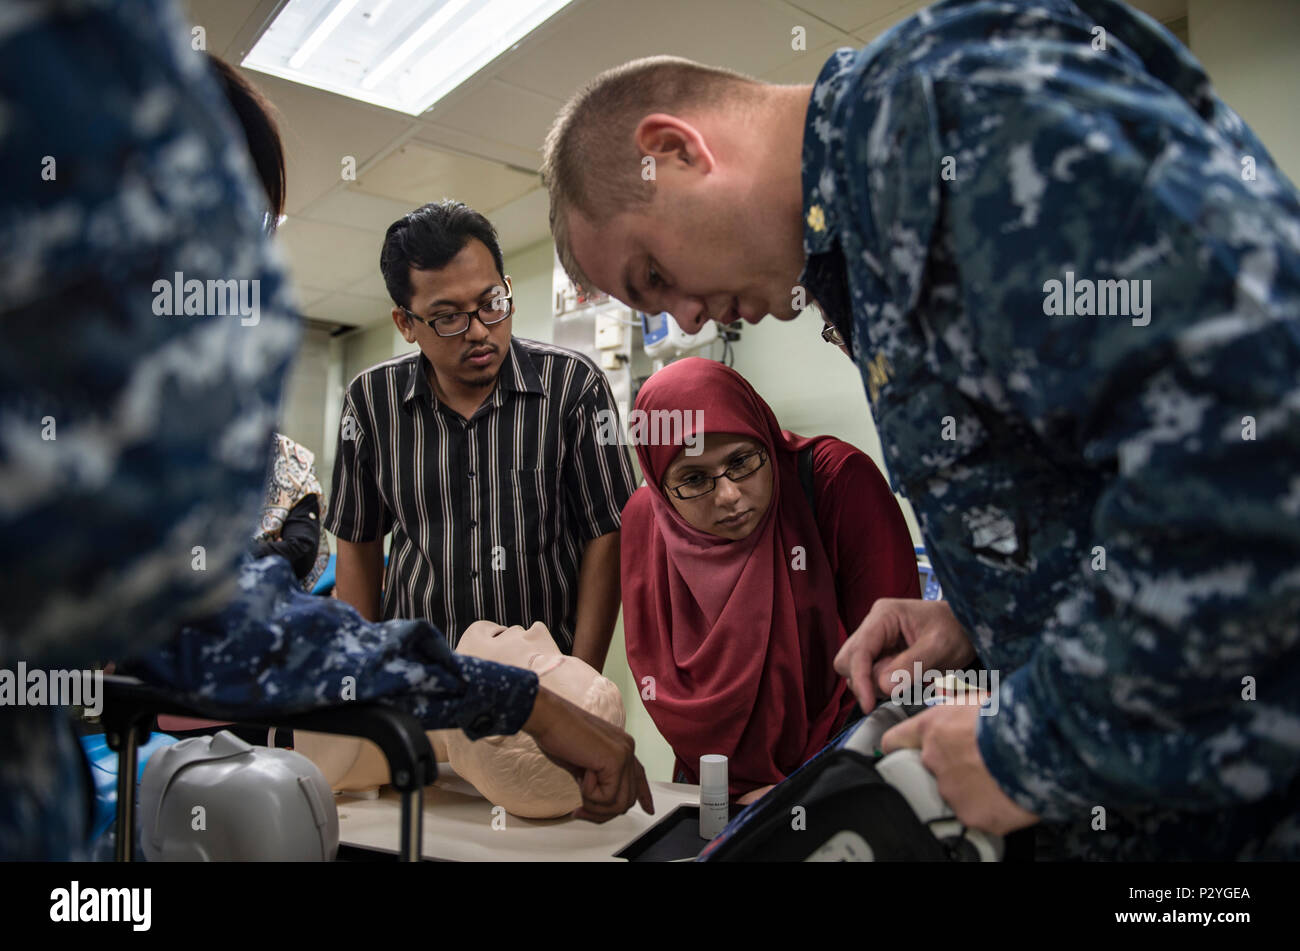 160809-N-QW941-084 KUANTAN, Malaysia (Aug. 9, 2016) Lt. Steven Whelpley (right), a native of Fredericksburg, Virginia and an emergency physician assigned to hospital ship USNS Mercy (T-AH 19), reviews defibrillator operations during a Pacific Partnership 2016 advanced cardiovascular life support training course aboard Mercy. During the training, Pacific Partnership 2016 personnel and Malaysian doctors discussed guidelines for treating patients with cardiac arrest and other life threatening emergencies. This is the first time Mercy and Pacific Partnership have visited Malaysia. During the missi Stock Photo